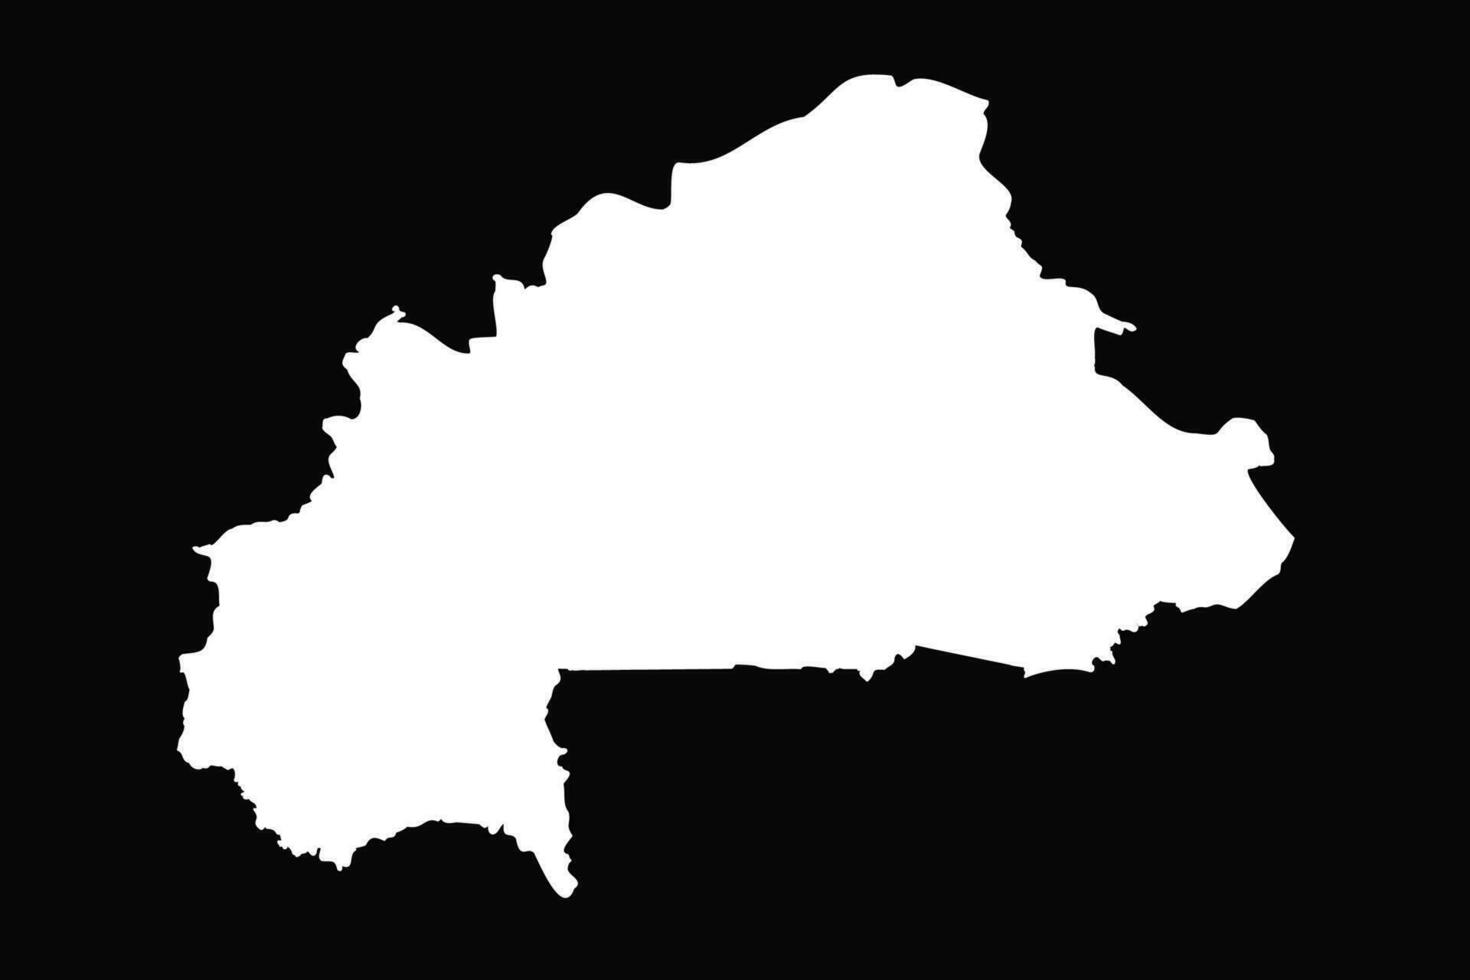 Simple Burkina Faso Map Isolated on Black Background vector